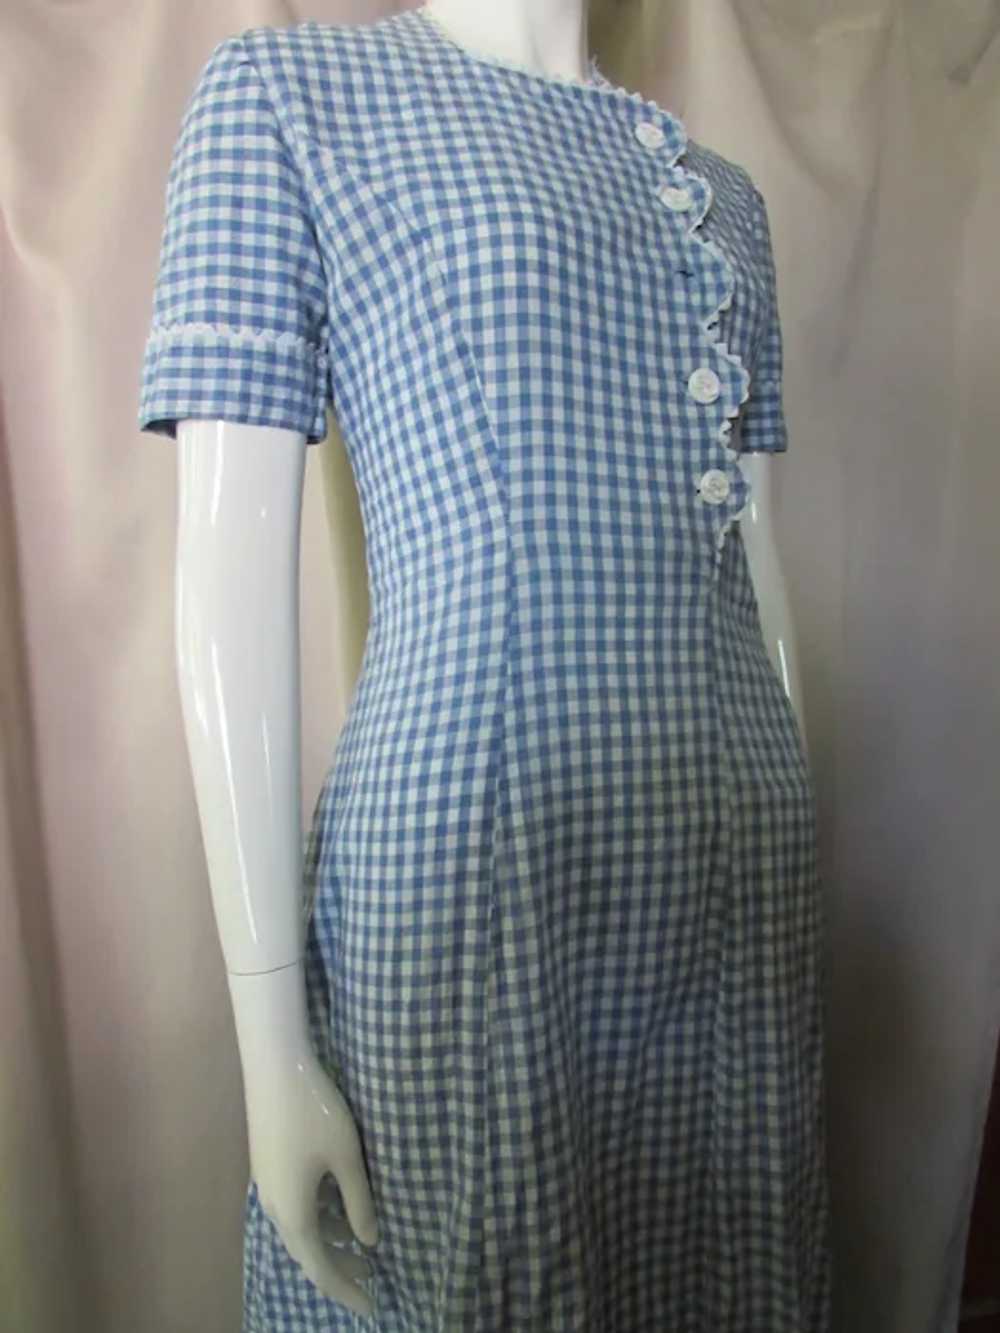 SALE Cutest Vintage Day Dress White & Blue Gingha… - image 4